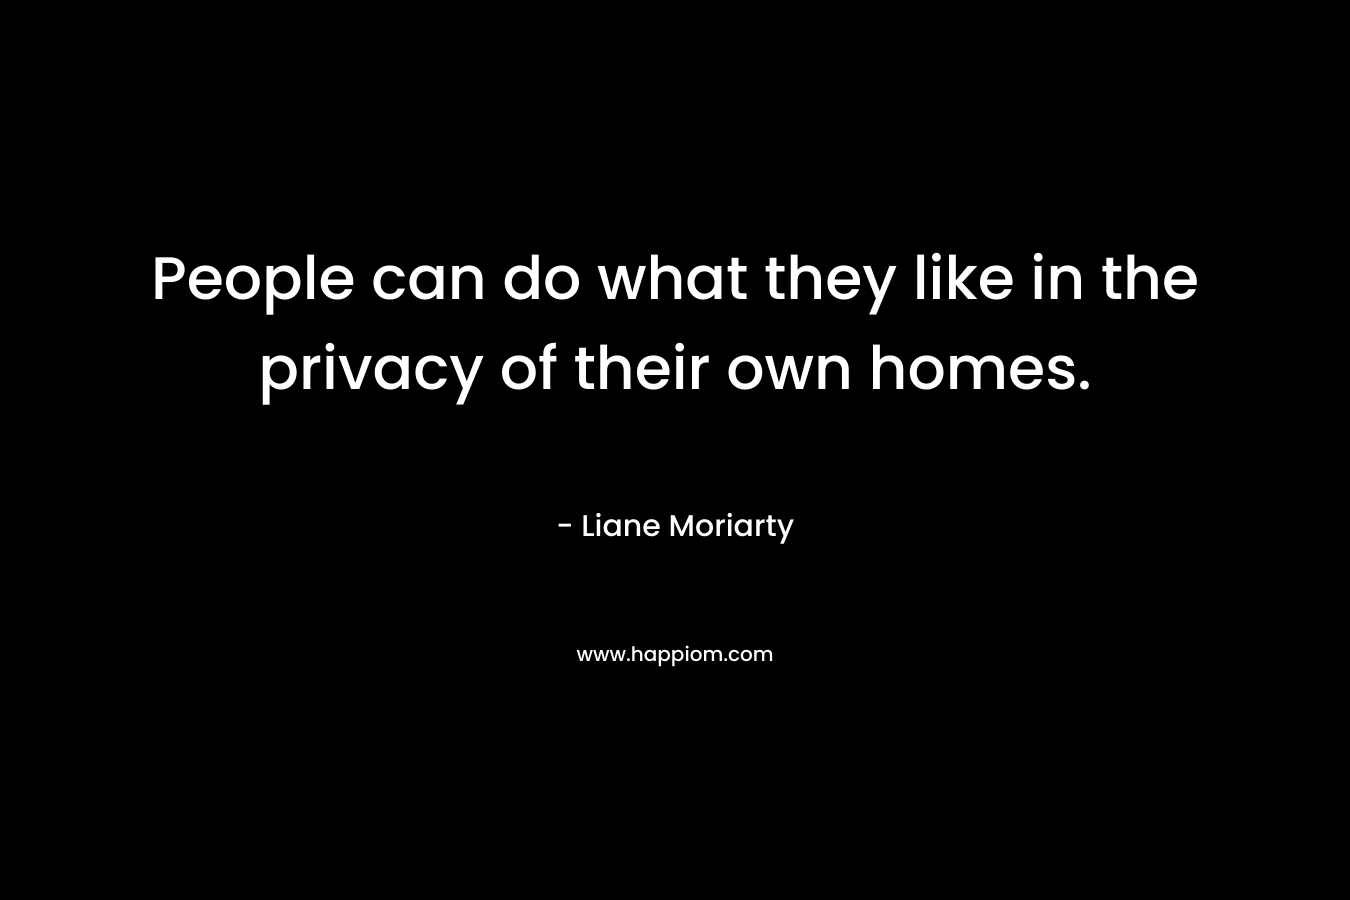 People can do what they like in the privacy of their own homes.